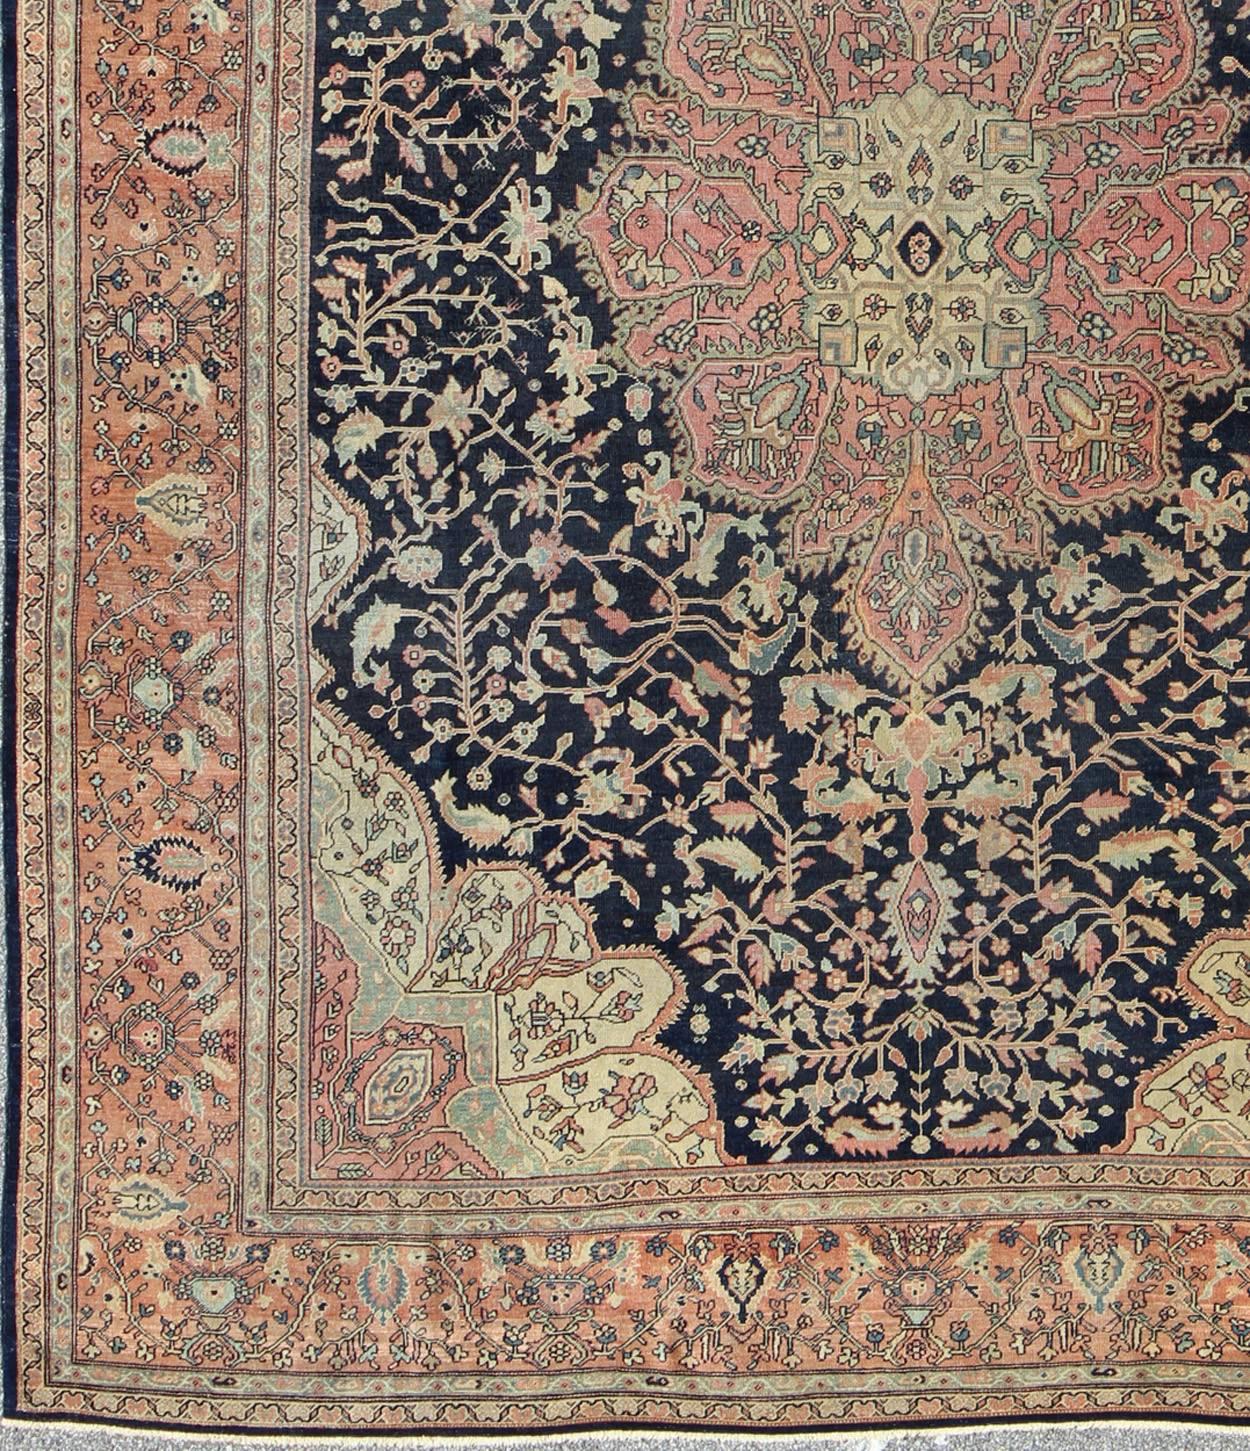 Antique Sarouk Farahan with Floral Motifs in Salmon, Green, Beige and Navy Blue. Keivan Woven Arts / rug / C-1002, country of origin / type: Iran / Antique Persian Feraghan Sarouk , circa 1900.

This outstanding antique Farahan Sarouk rug, from late